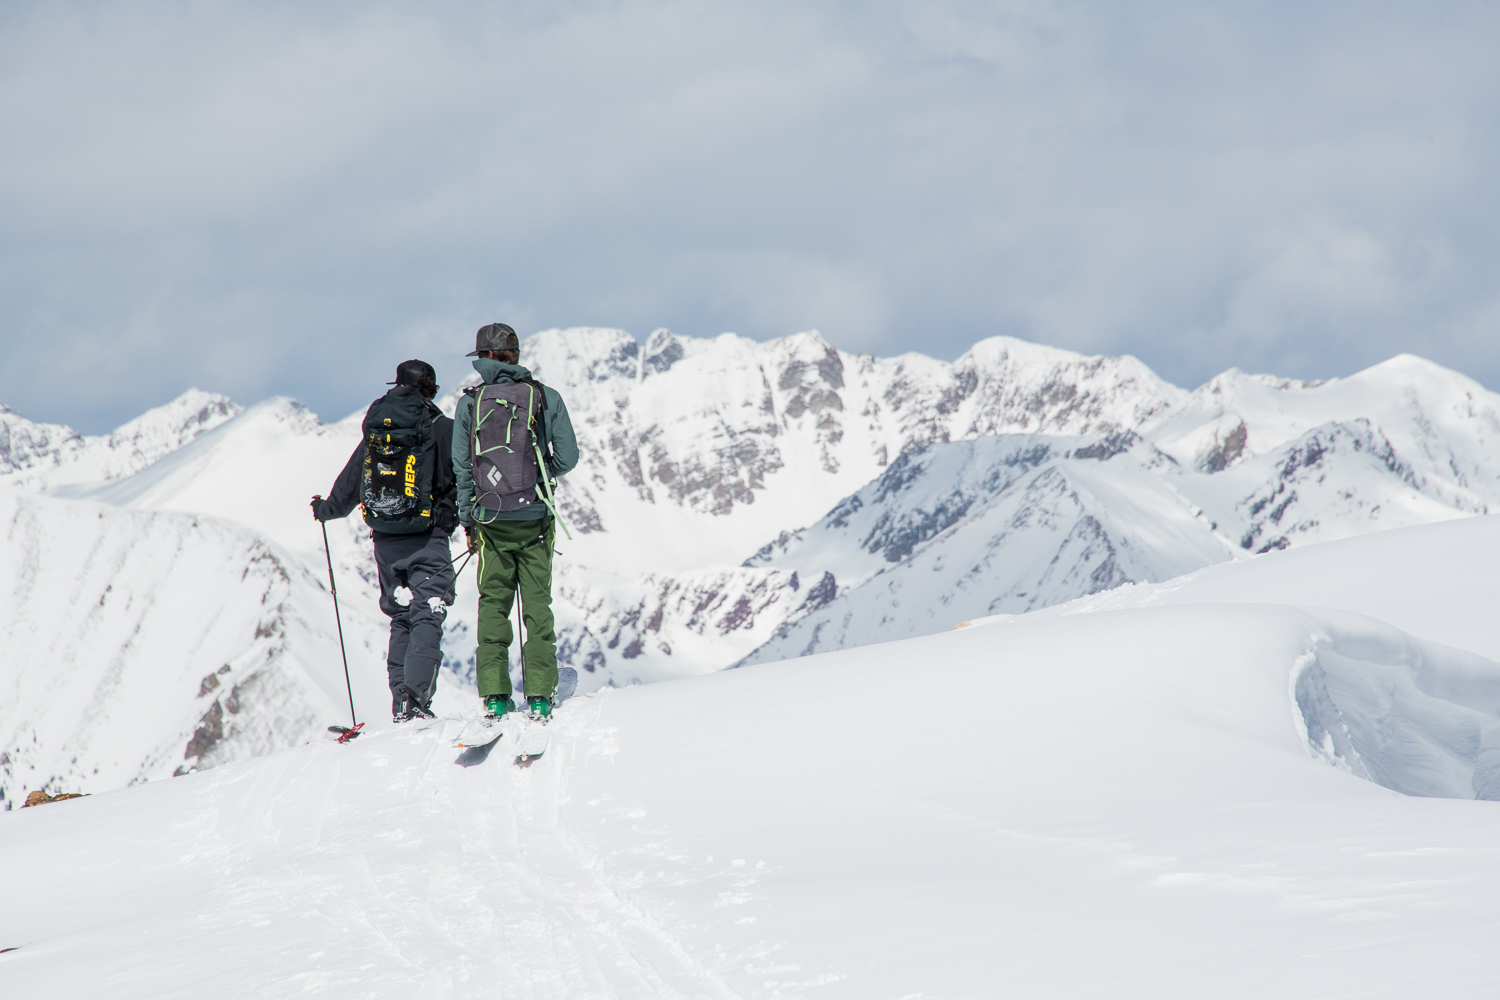 Two people backcountry skiing in Crested Butte